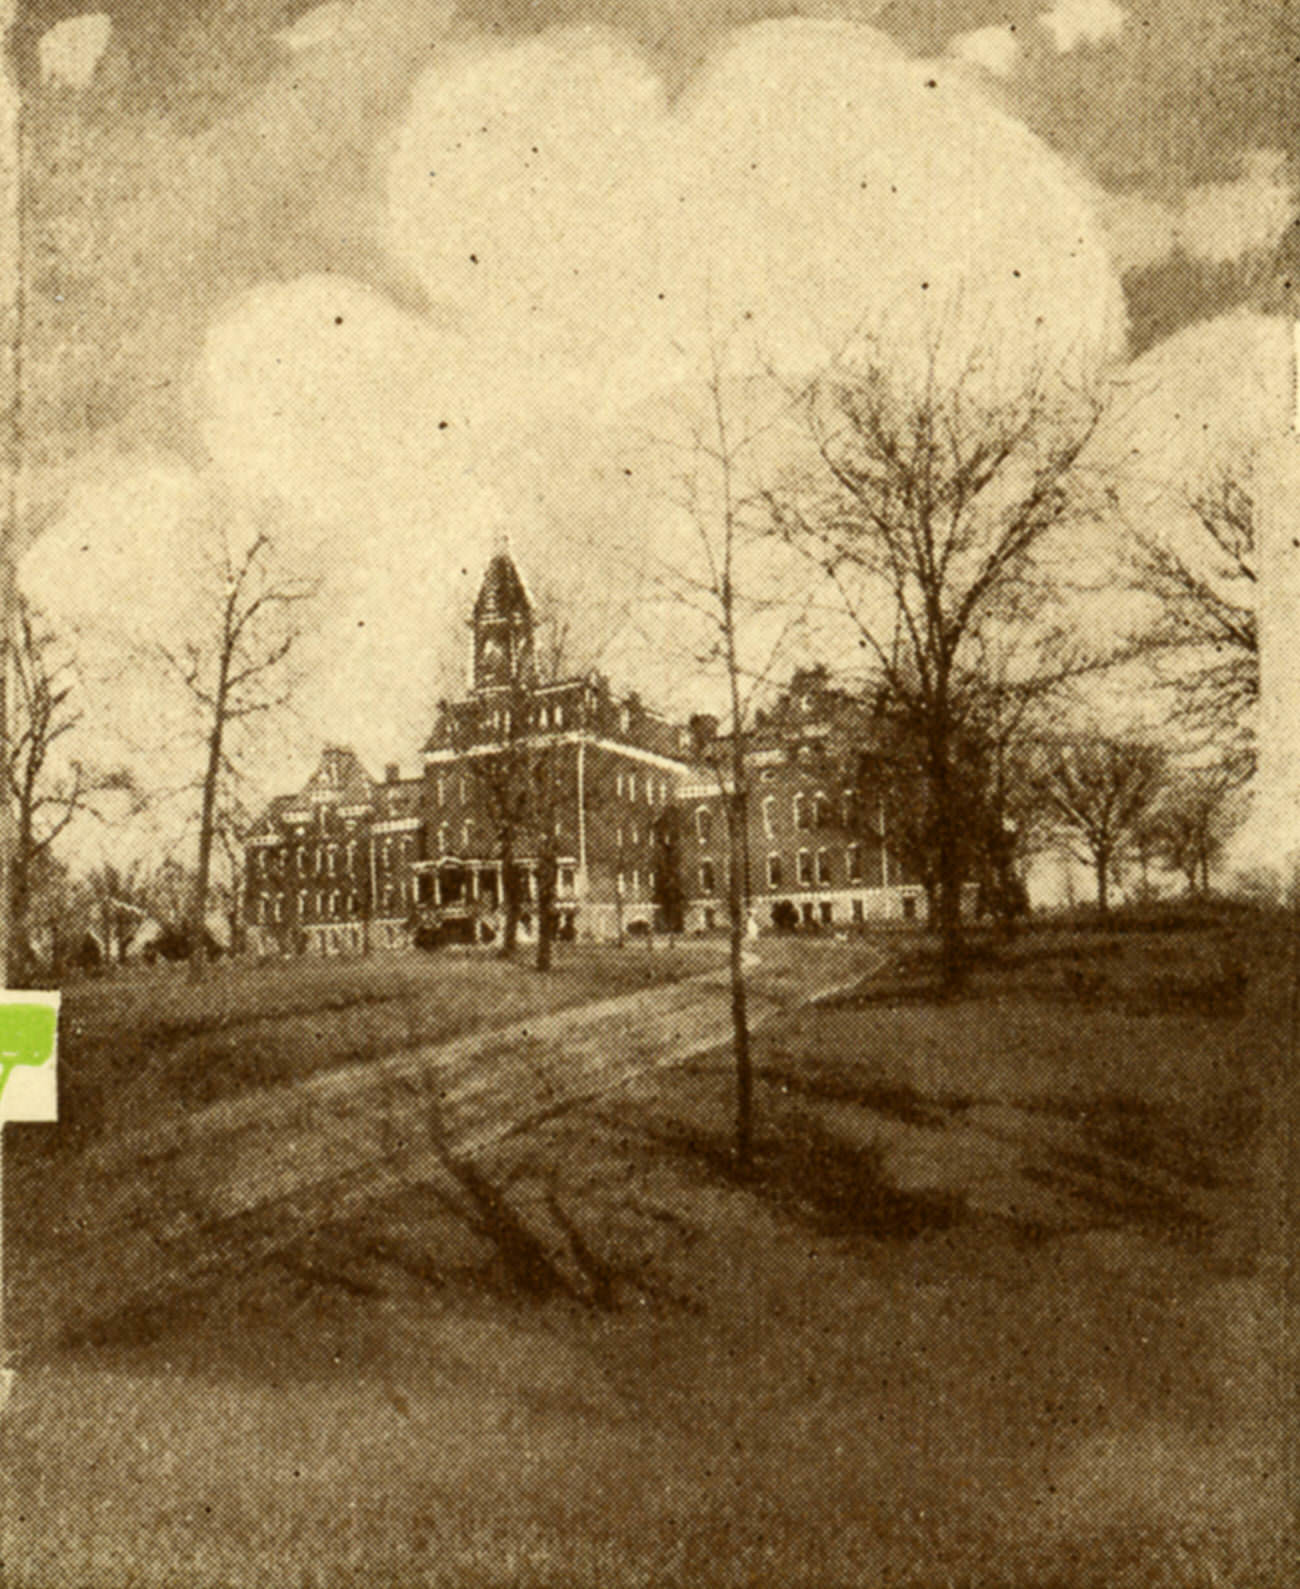 Franklin County Children's Home, built in 1880 and demolished in 1955, Circa 1915.